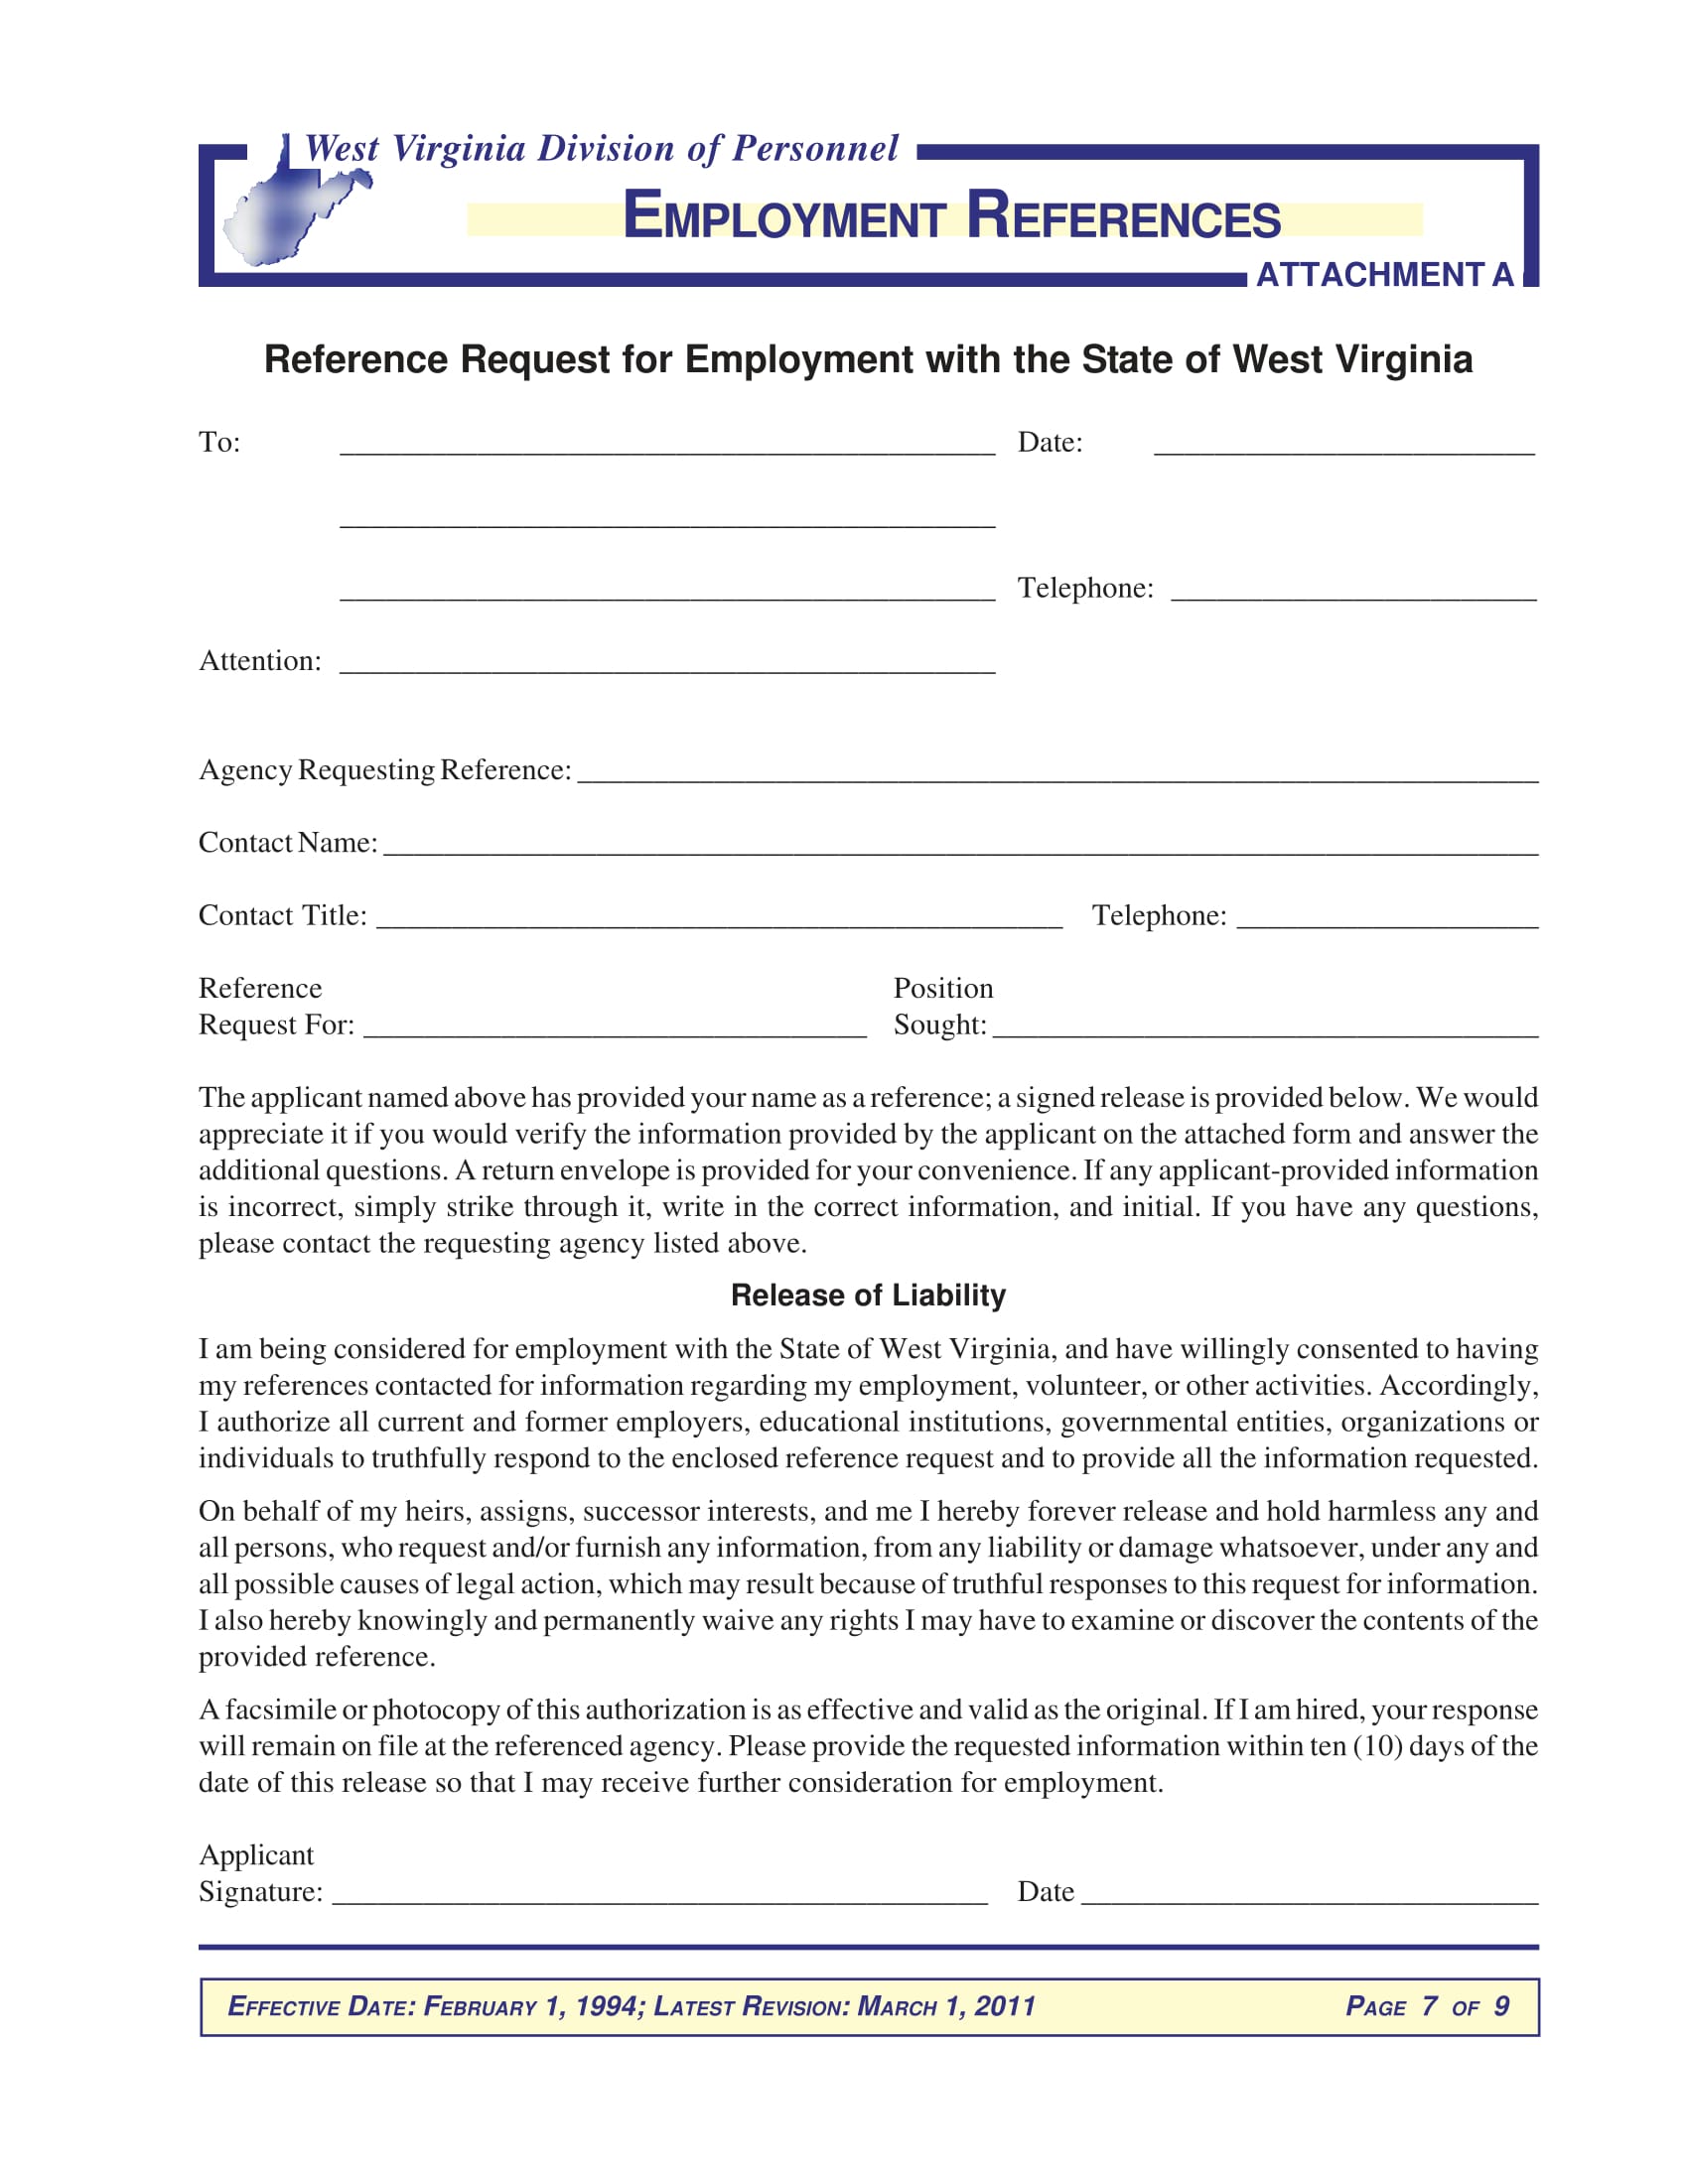 reference request with liability release form 7